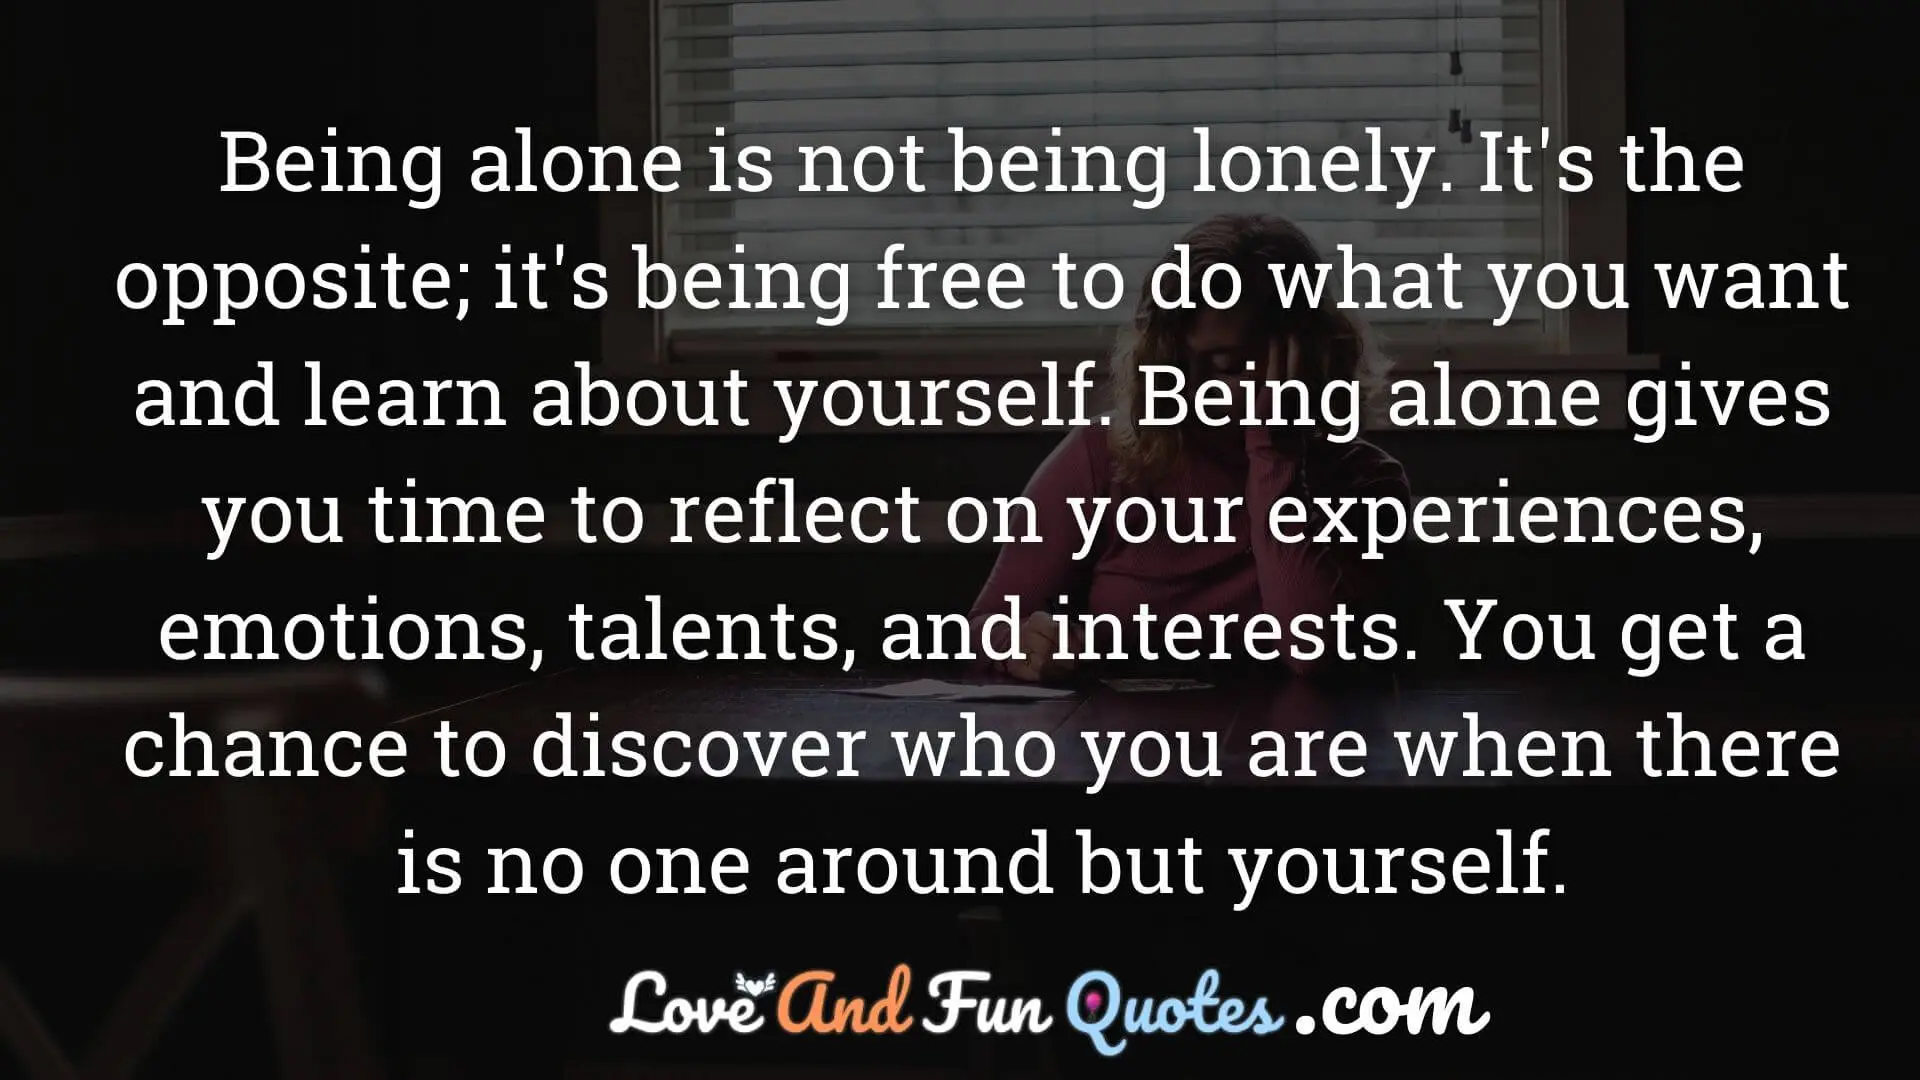 Being alone is not being lonely. It's the opposite; it's being free to do what you want and learn about yourself. Being alone gives you time to reflect on your experiences, emotions, talents, and interests. You get a chance to discover who you are when there is no one around but yourself.